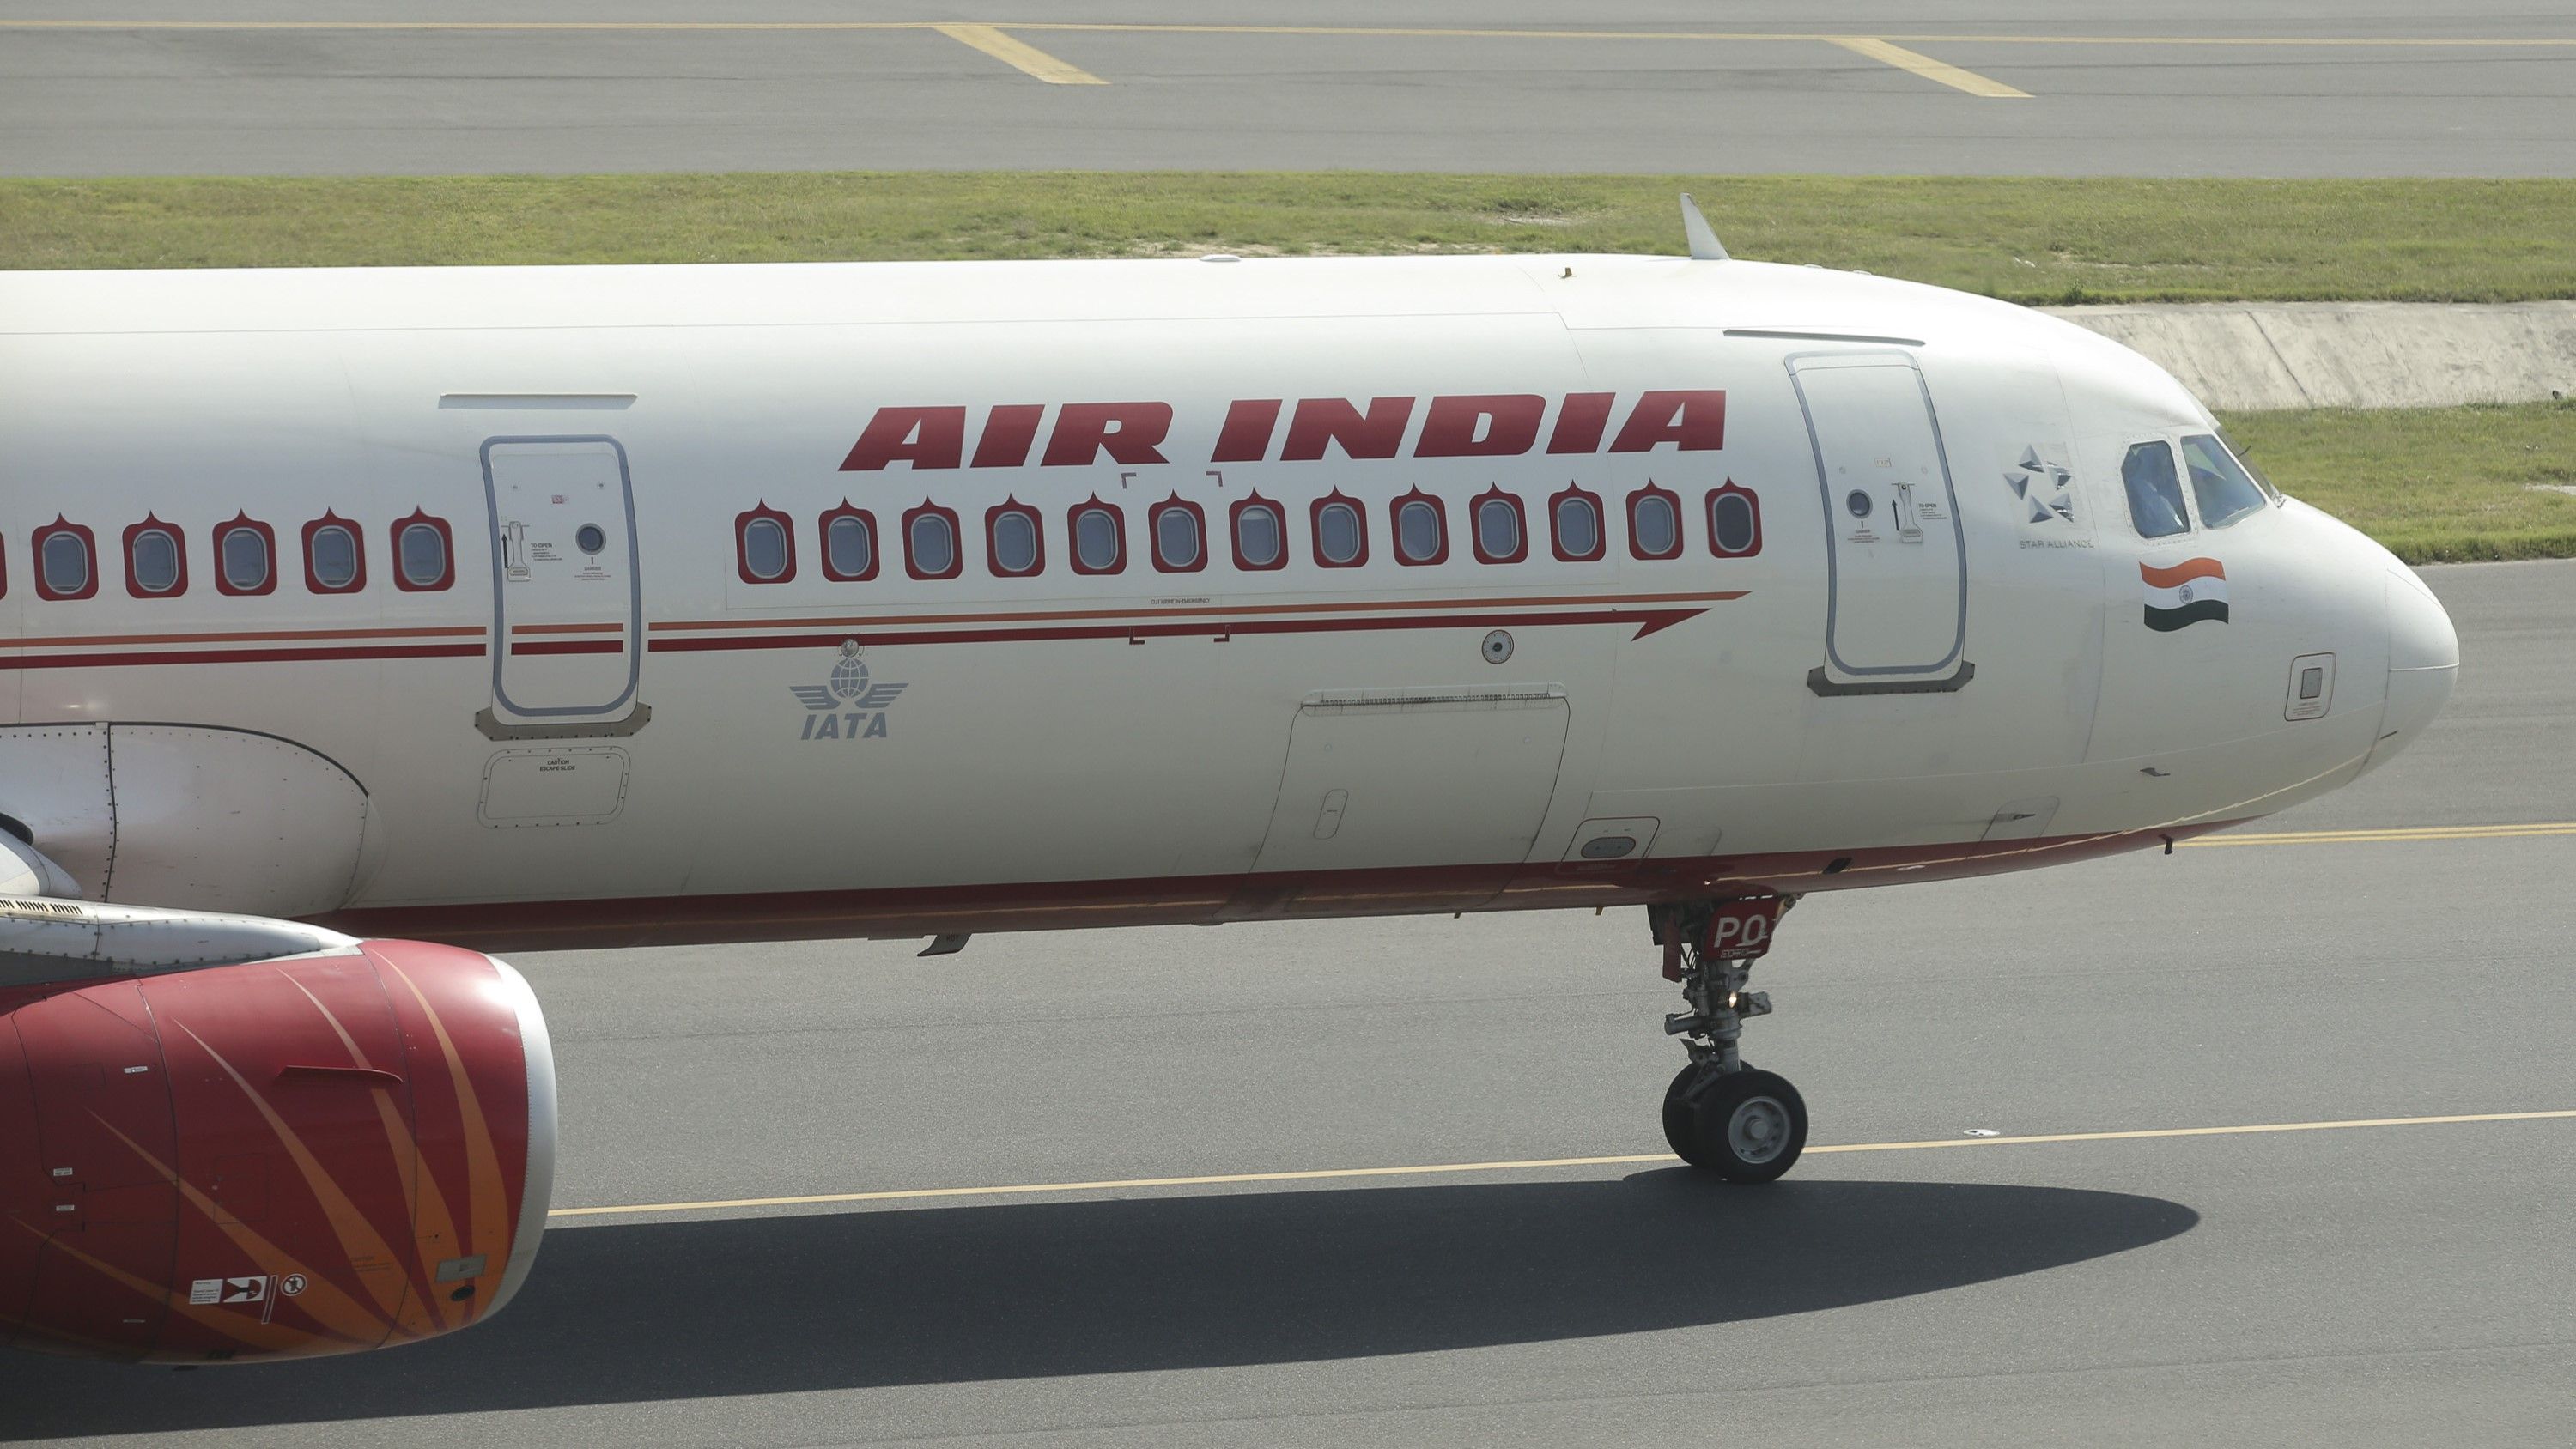 Air India Airbus A320 aircraft in Delhi Airport going to the the terminal through the taxiway